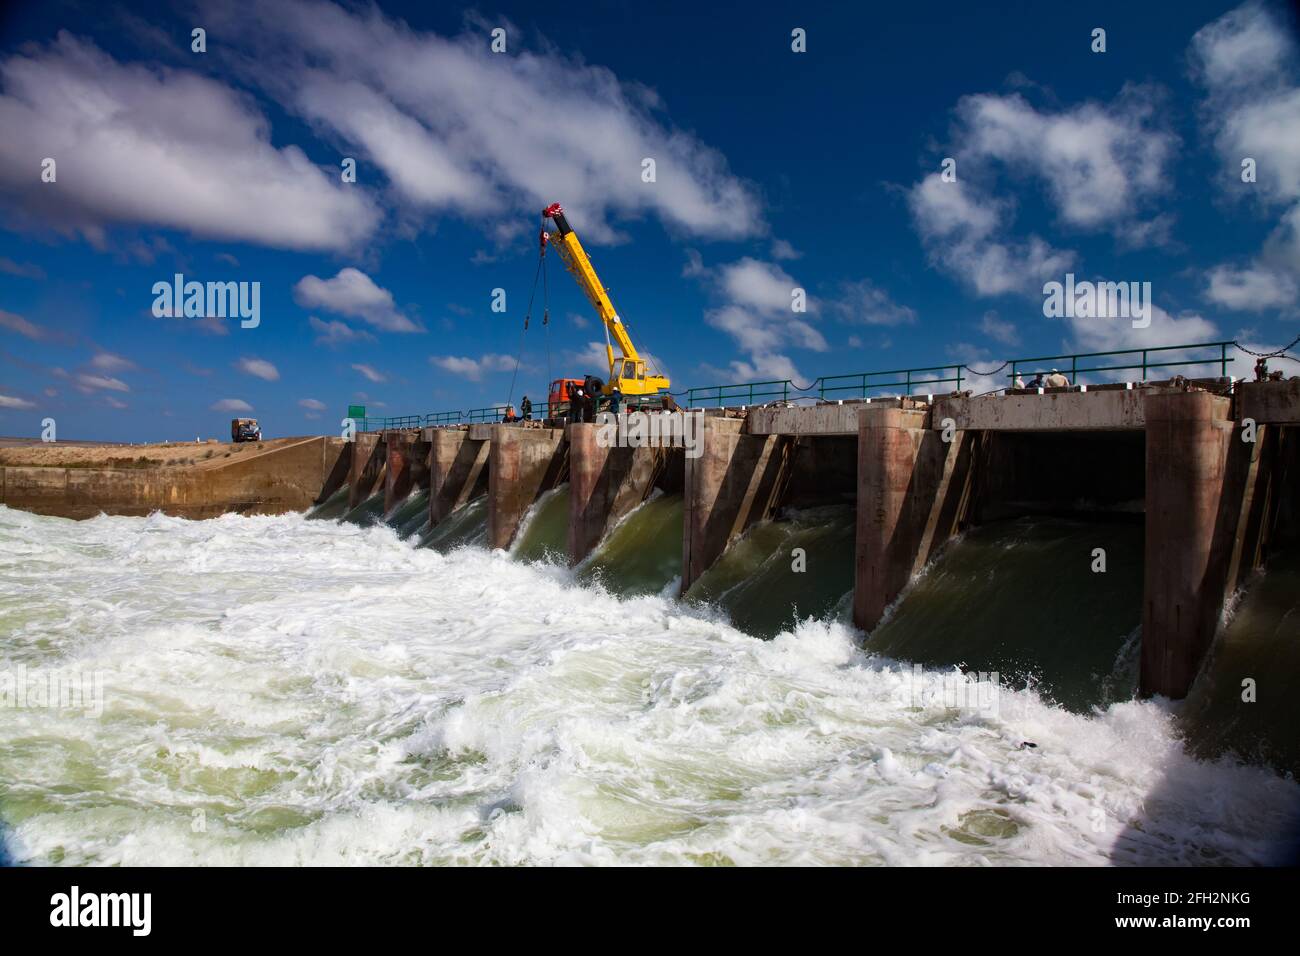 Kok-aral,Kazakhstan:Aral Sea Kok-aral dam. Water discharge in flood.Open shutters. Yellow mobile crane and workers on dam. Stock Photo